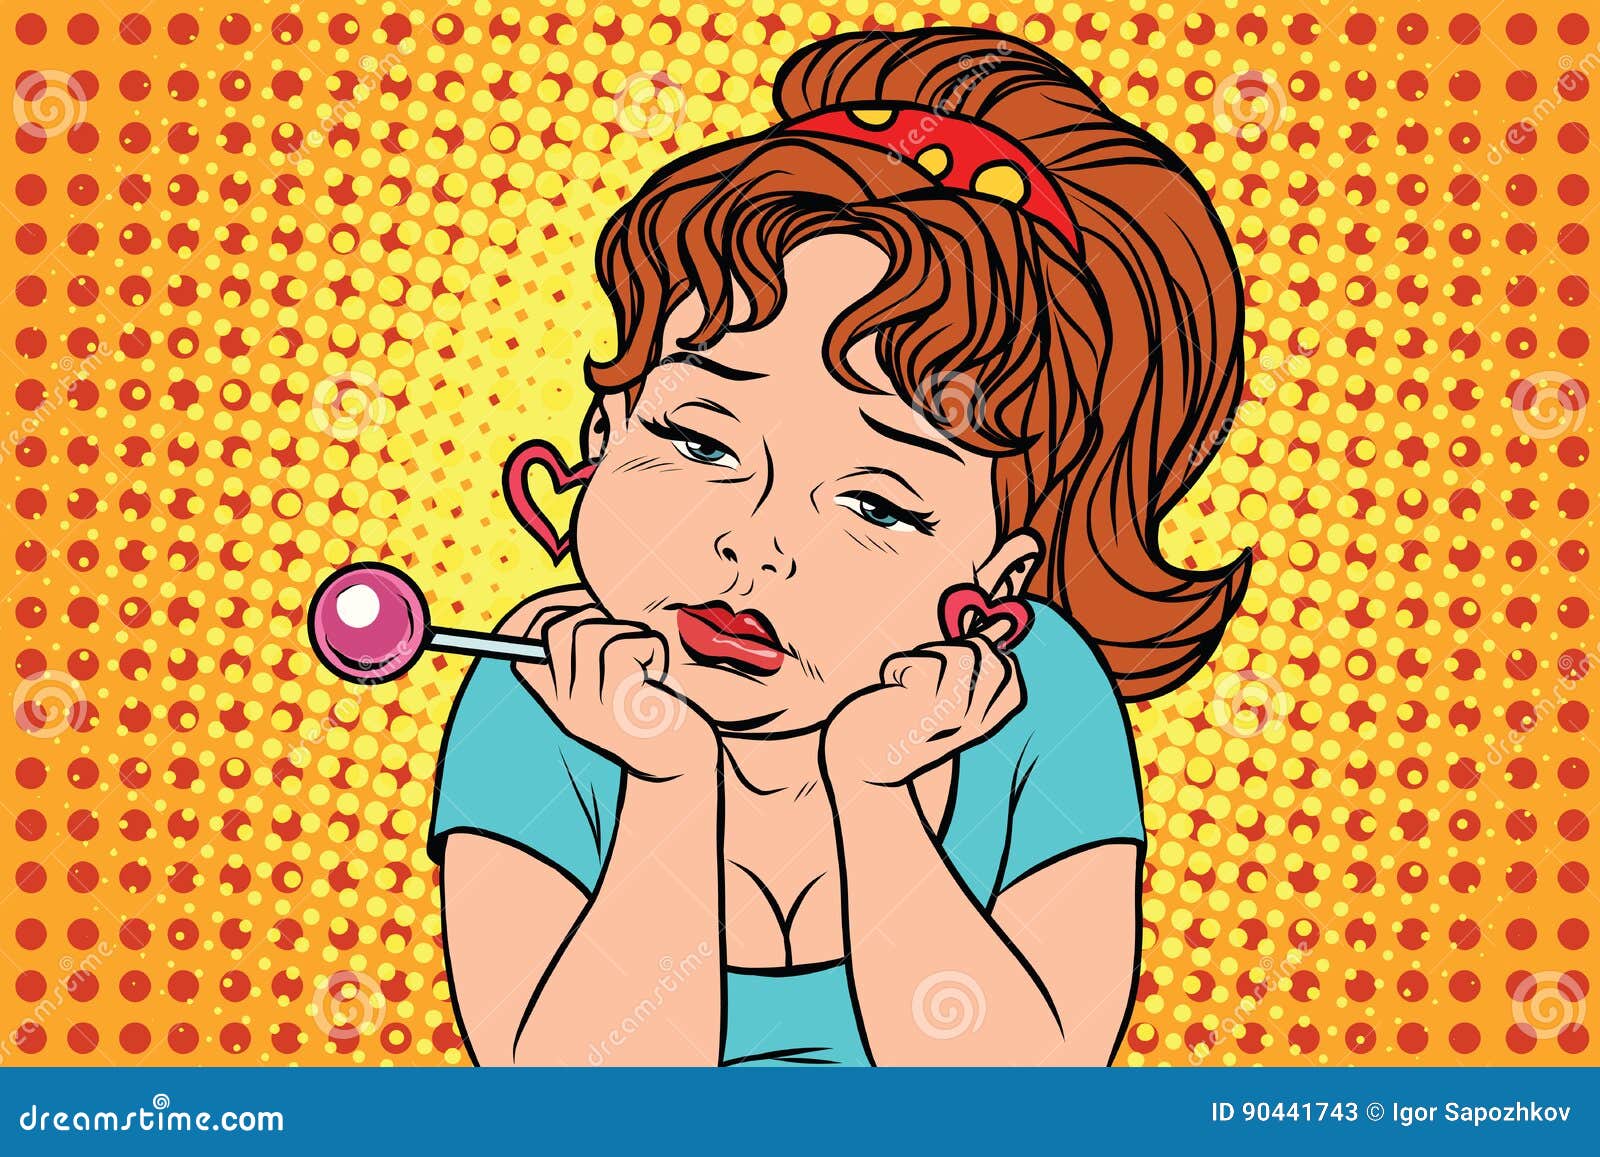 Very Sad Vintage Girl with Lollipop Stock Vector - Illustration of ...